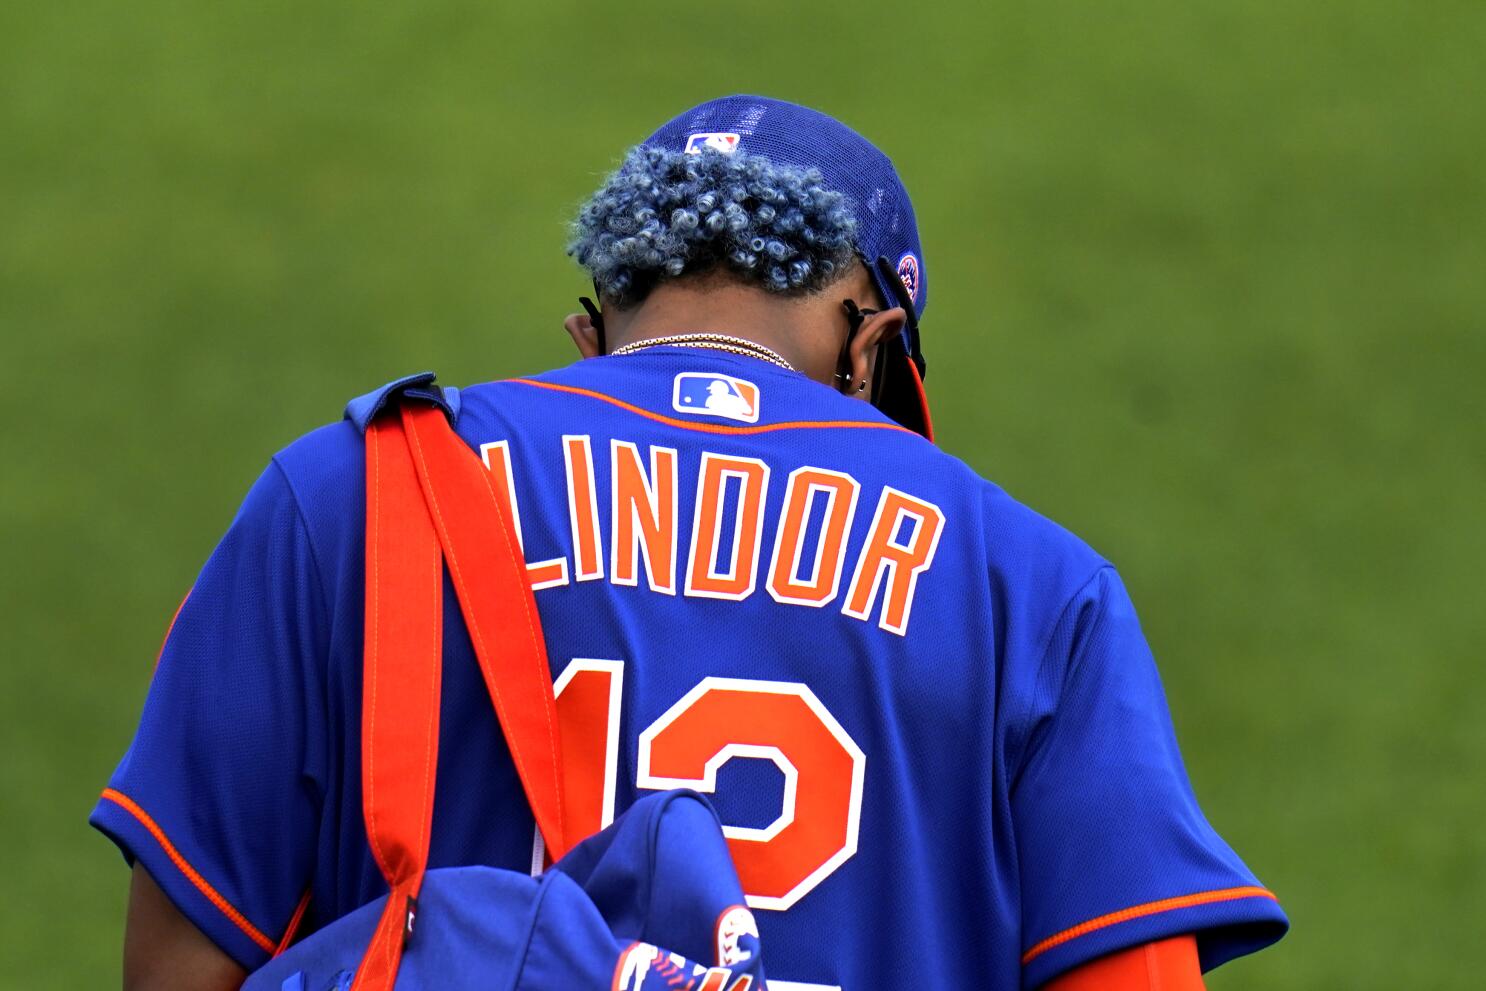 Lindor, new Mets hope to put World Series practice in play - The